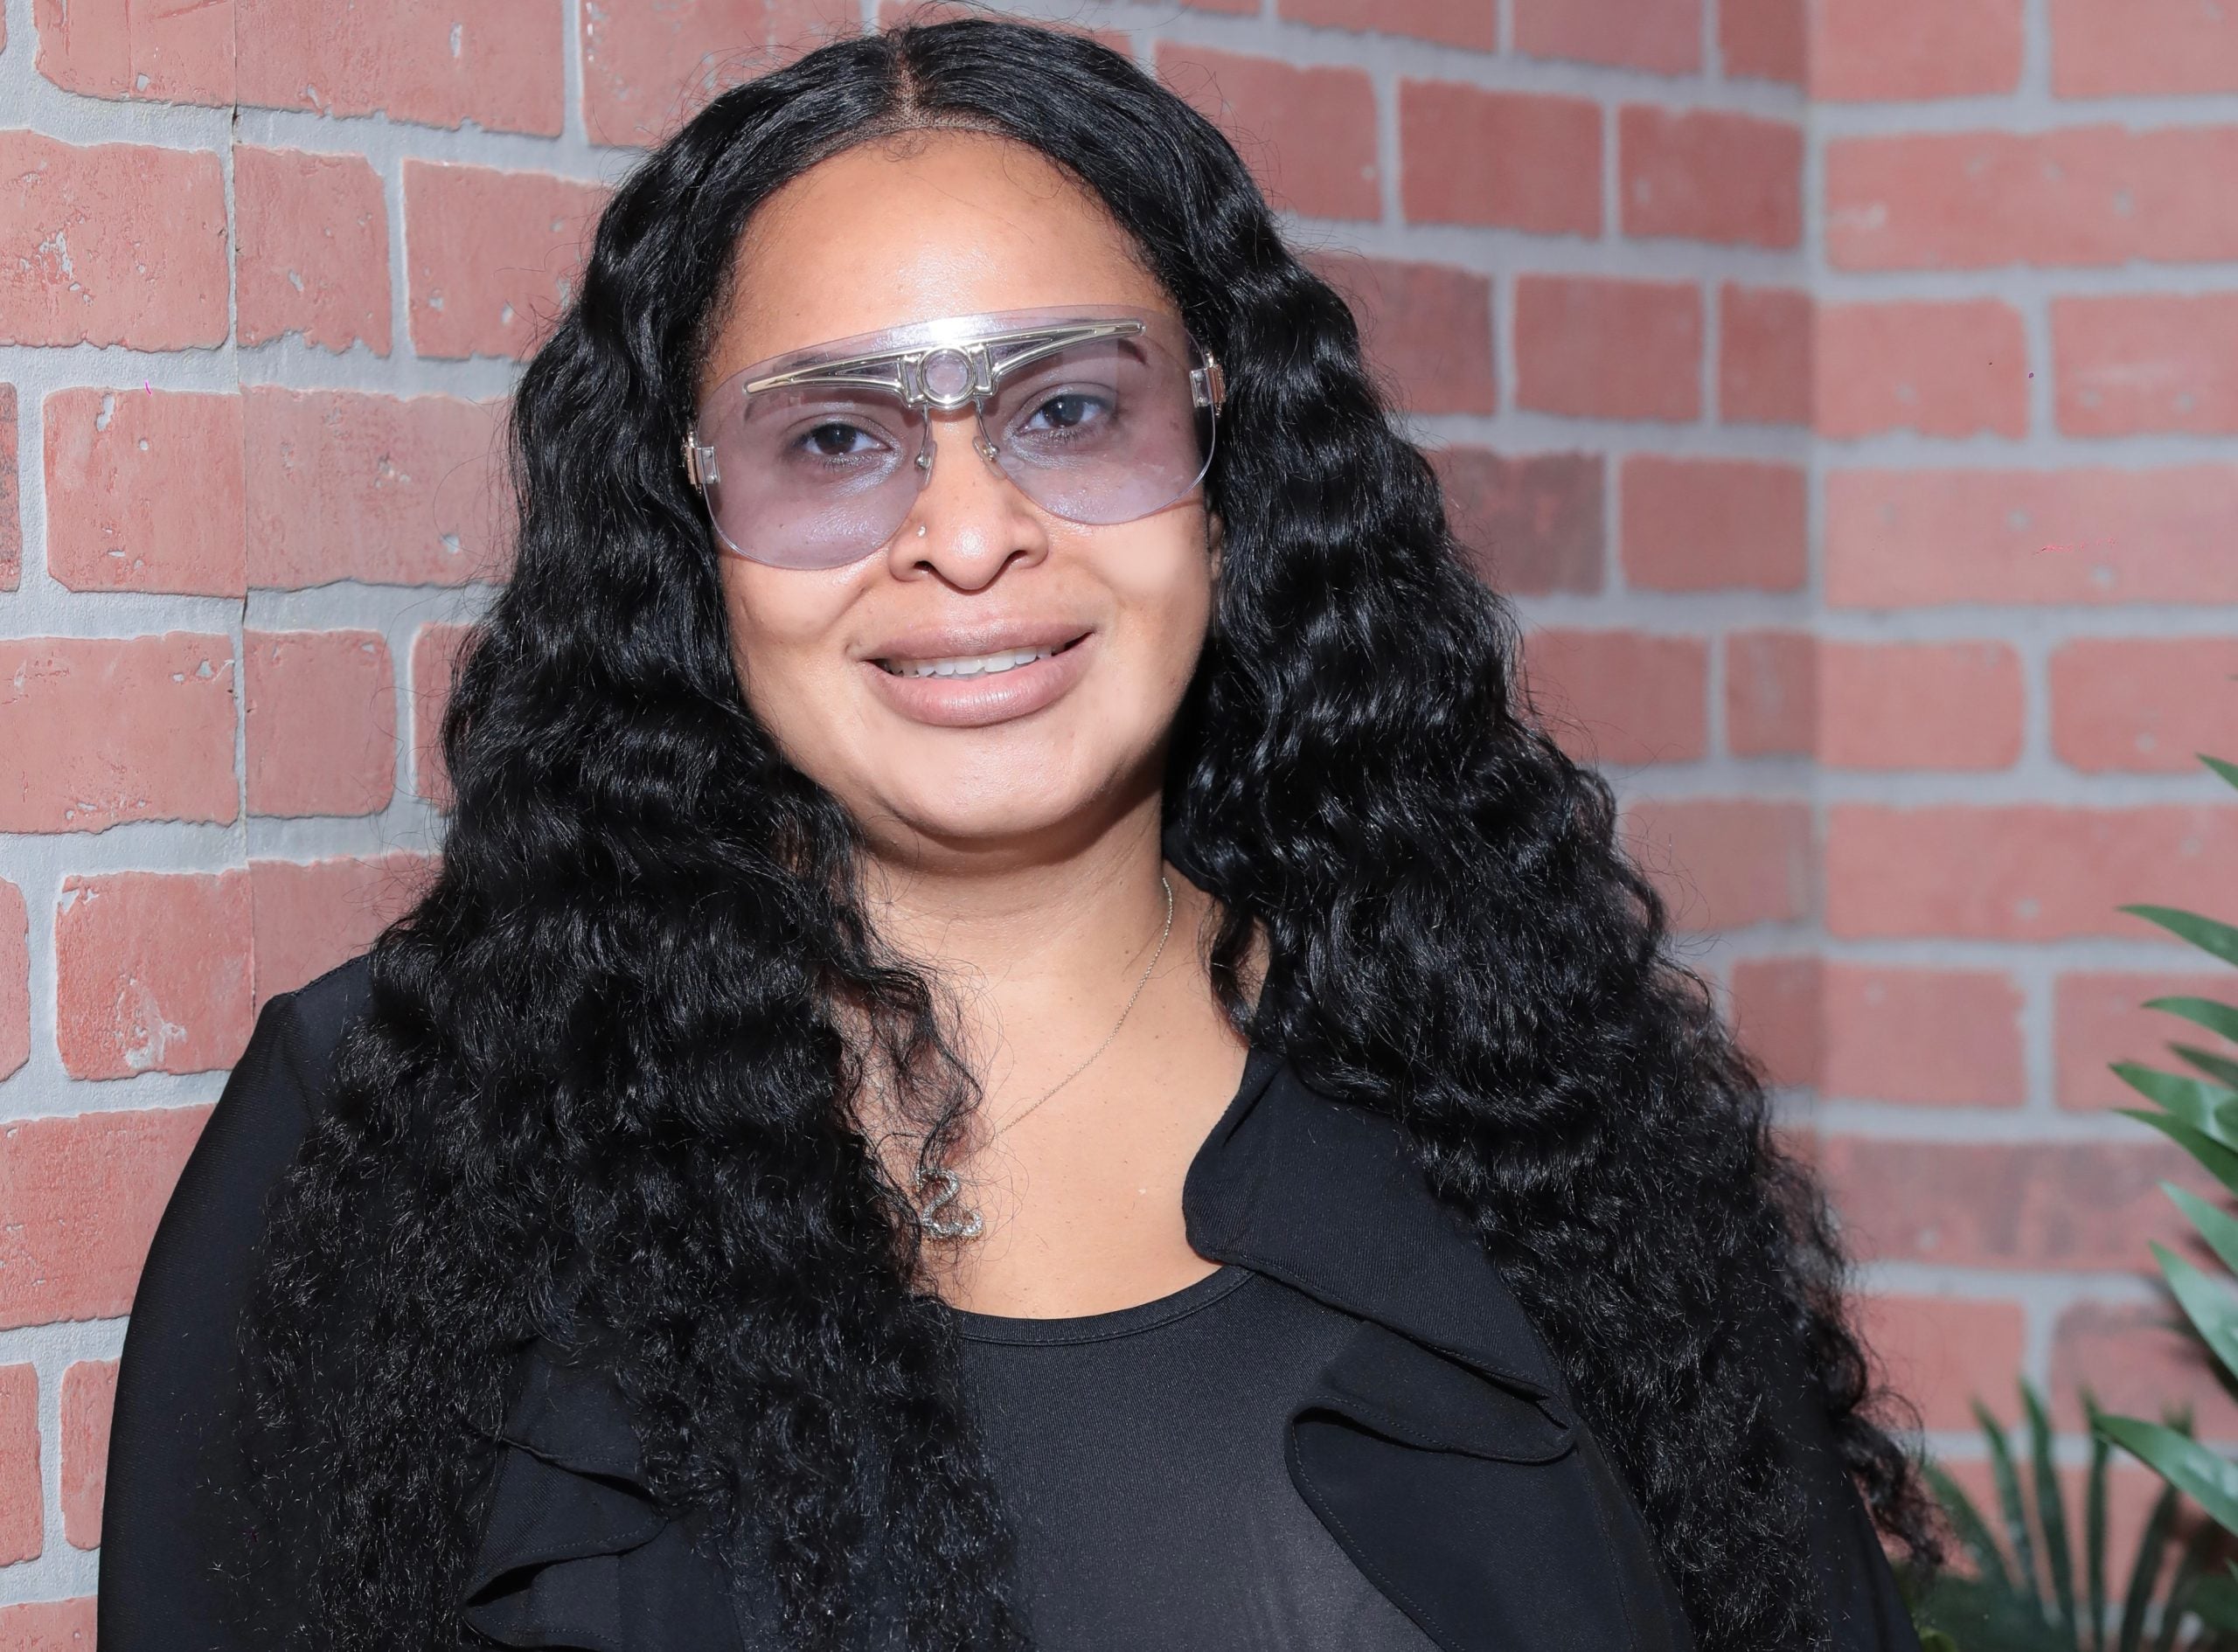 She Moved From Trinidad With $20 In Her Pocket And Now She Owns This New York Beauty Spa